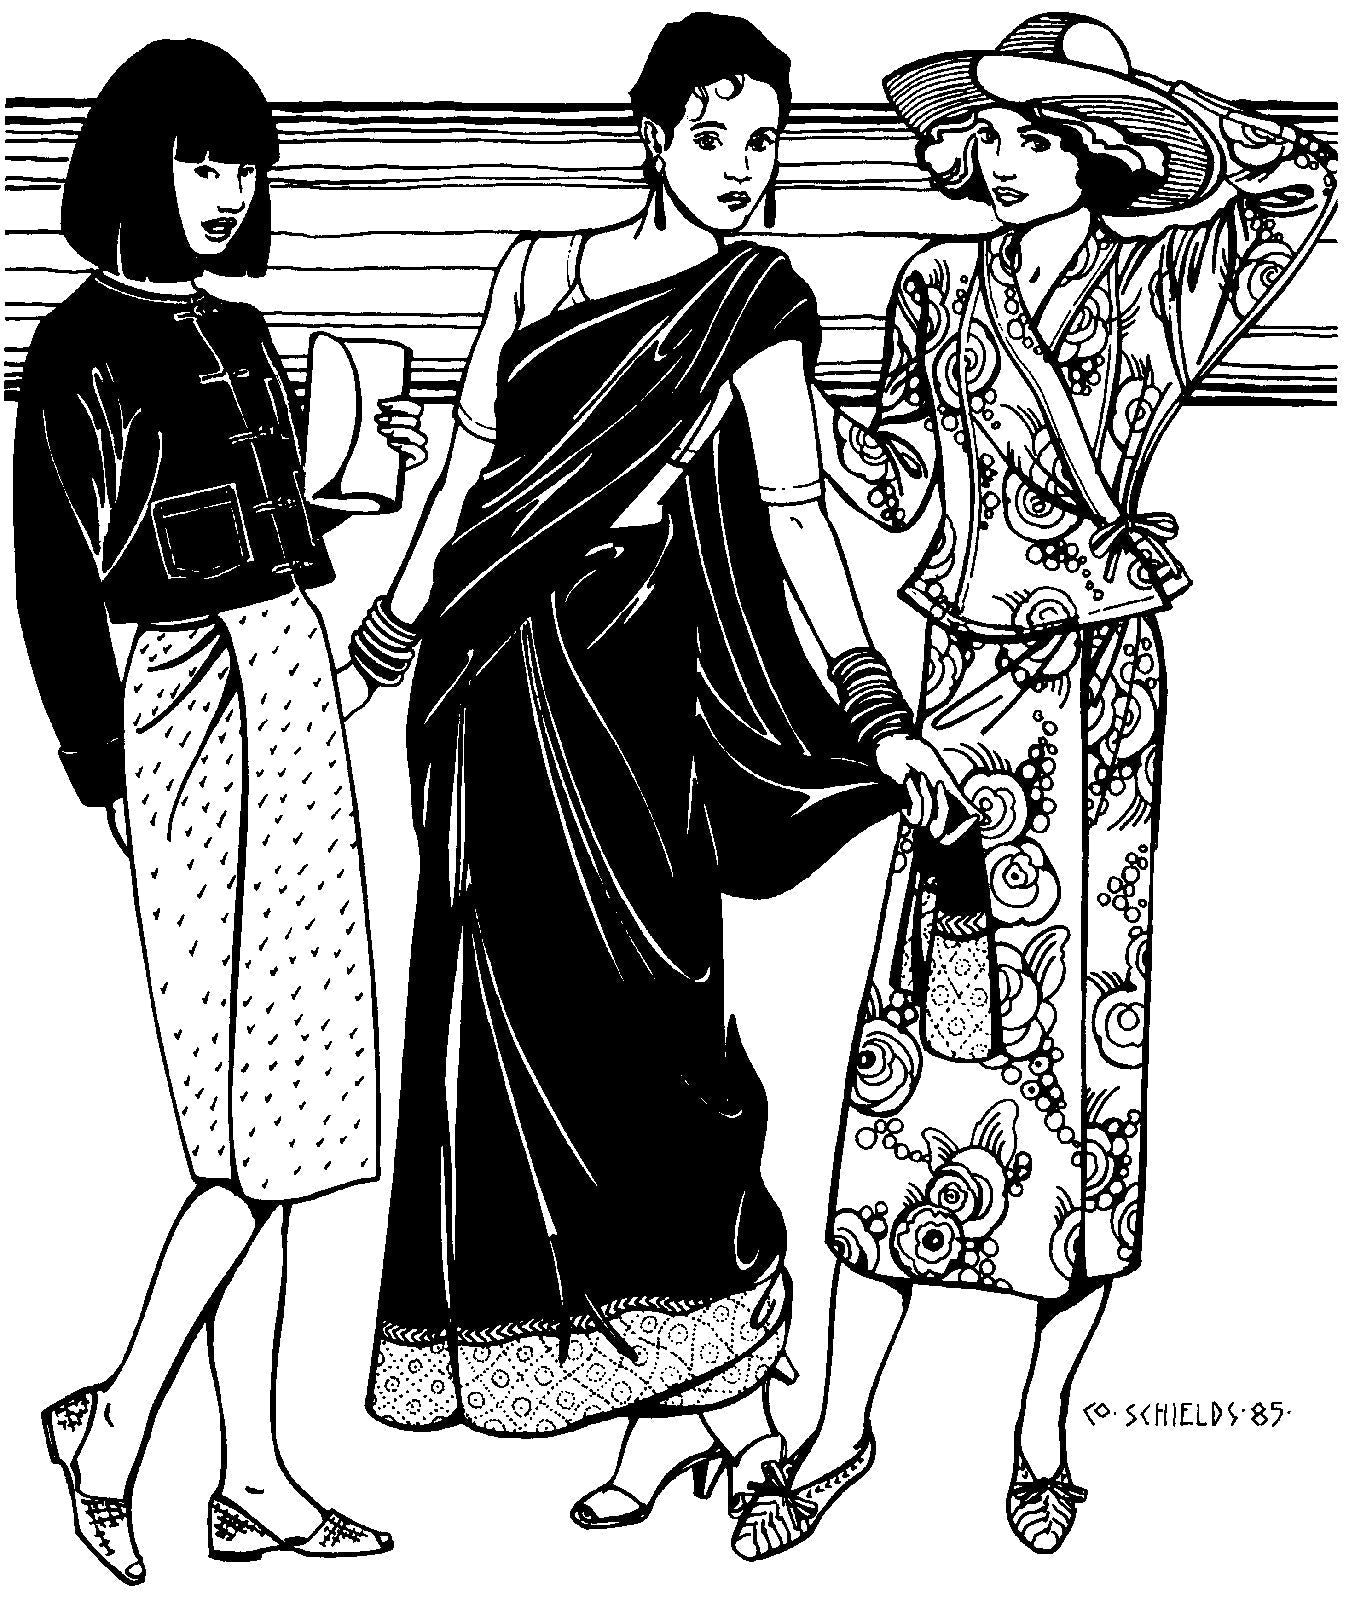 Pen and ink line drawing by artist Gretchen Shields.  Three women wearing the three tops in pattern.  woman on left wears Burmese Jacket, woman in center wears Indian Choli, and woman on right wears the Thai Blouse.